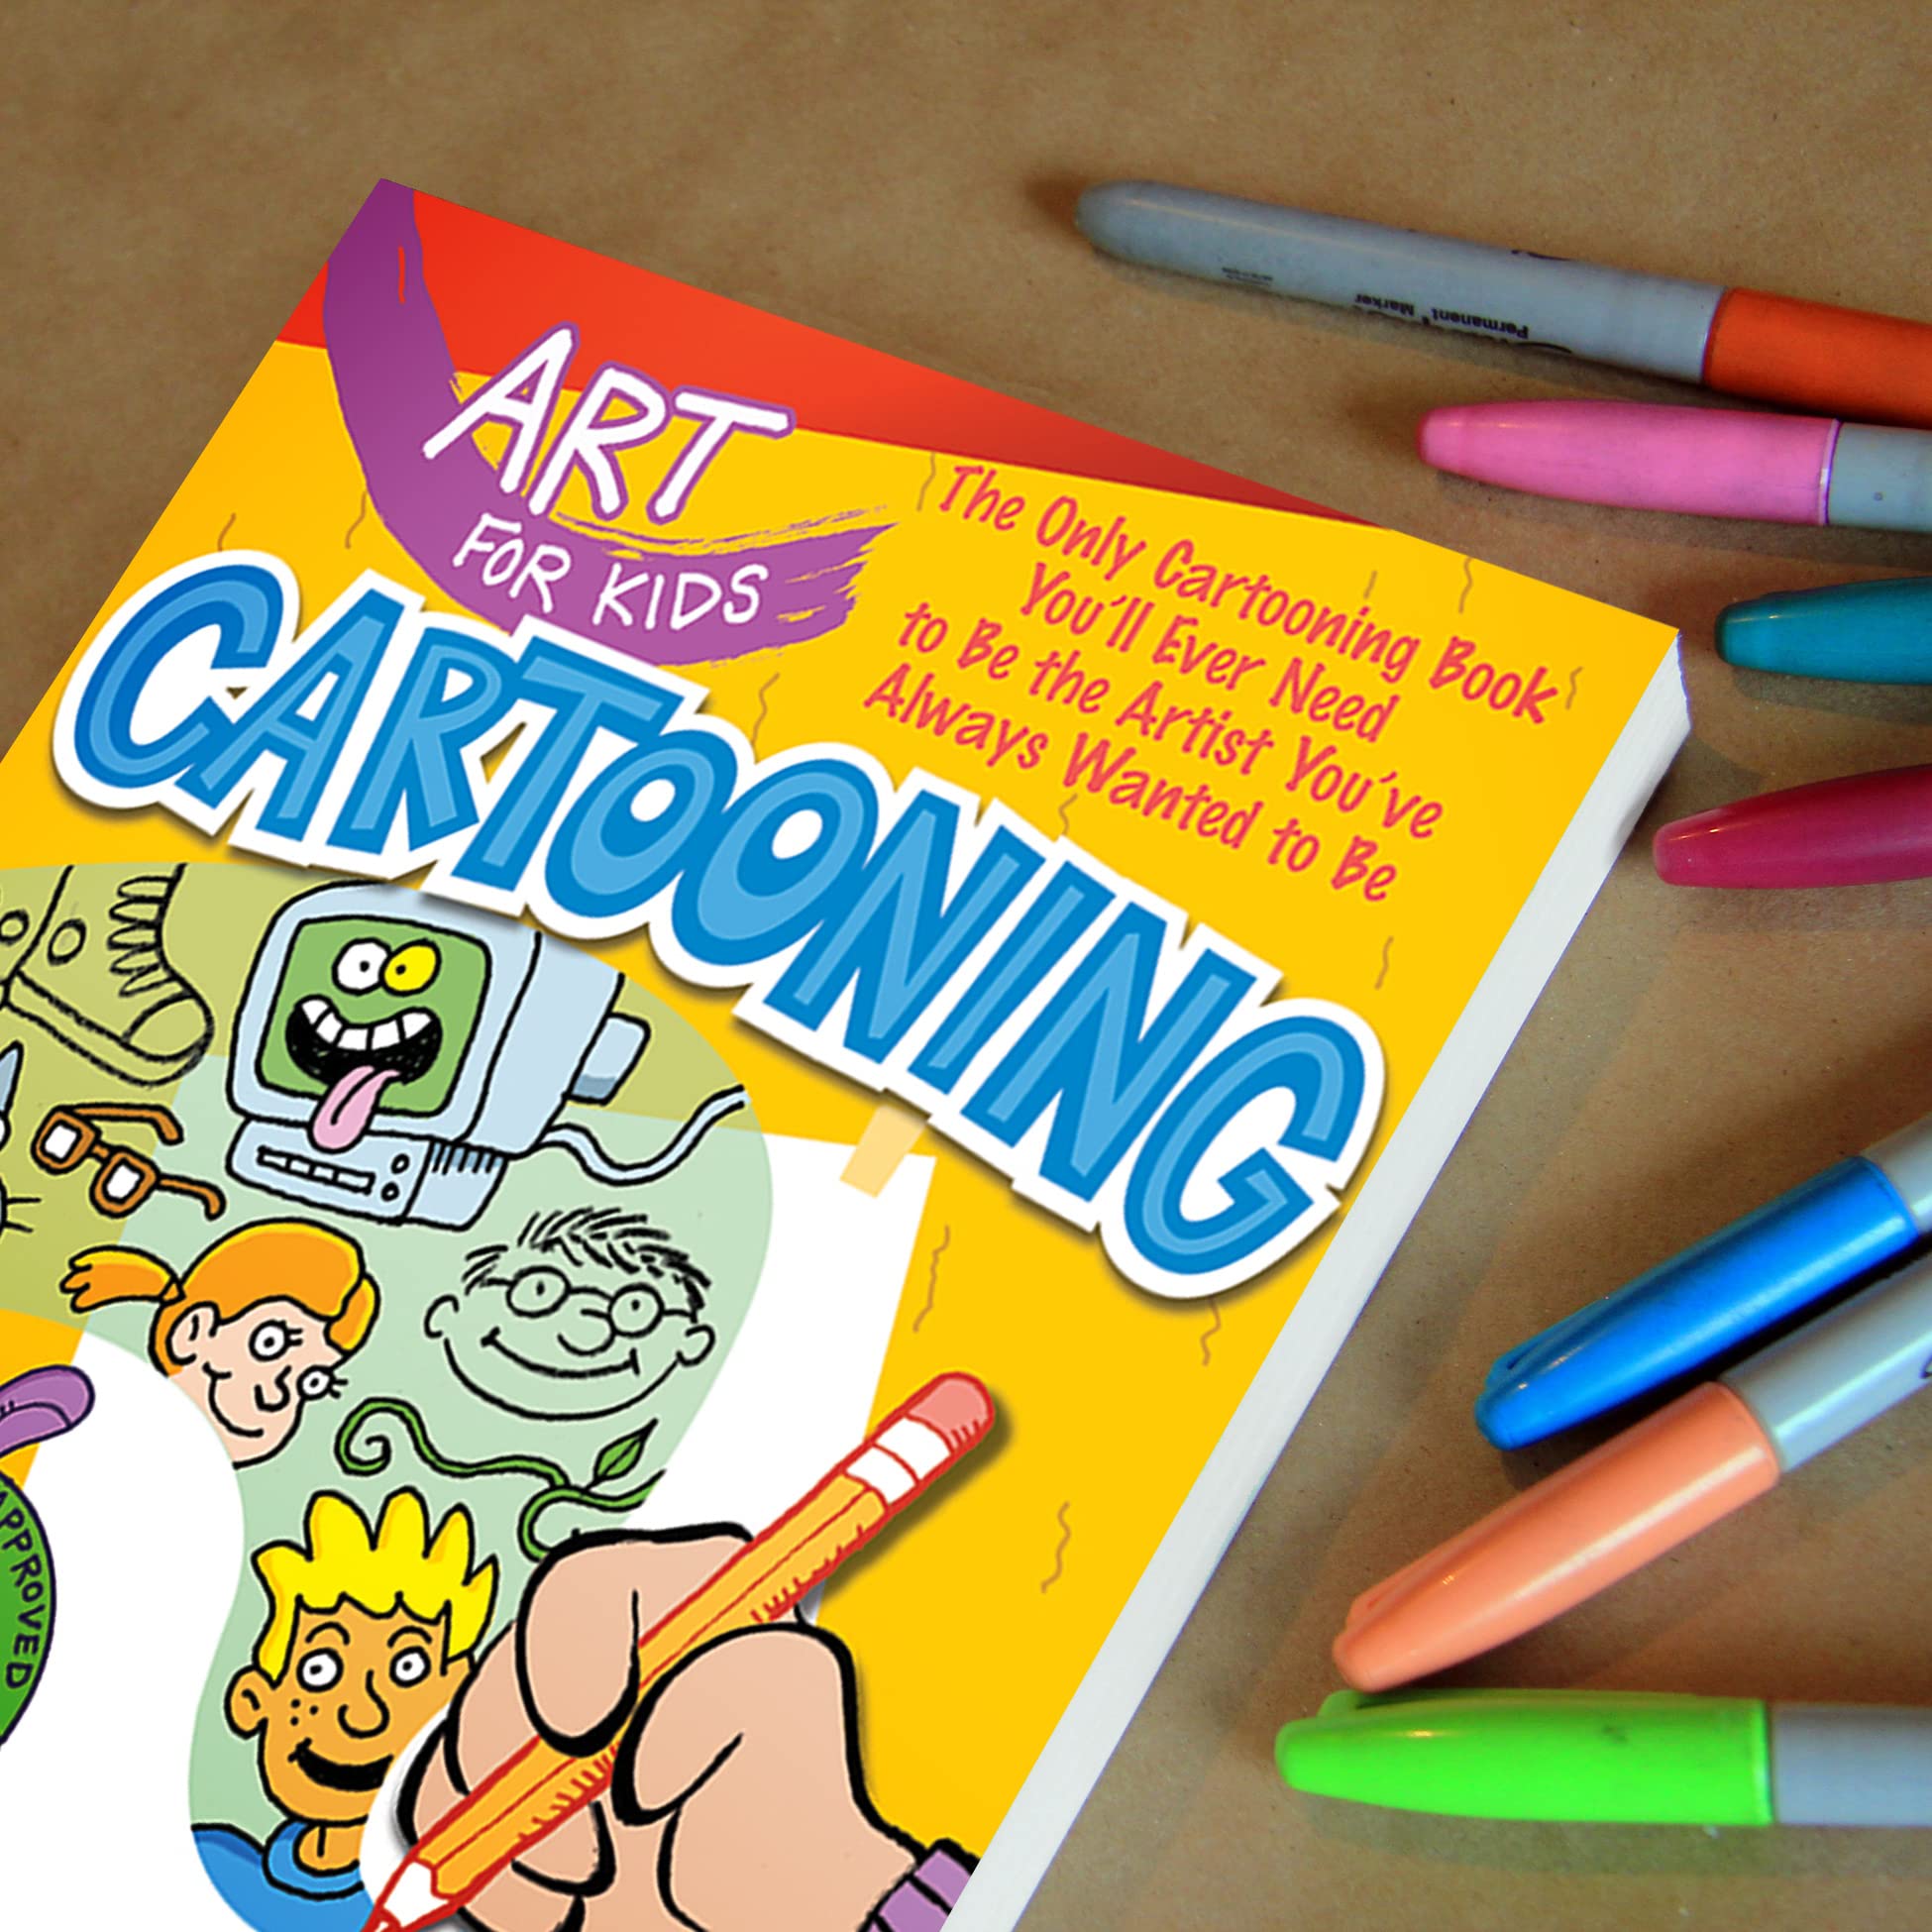 Art for Kids: Cartooning: The Only Cartooning Book You'll Ever Need to Be the Artist You've Always Wanted to Be (Volume 2)